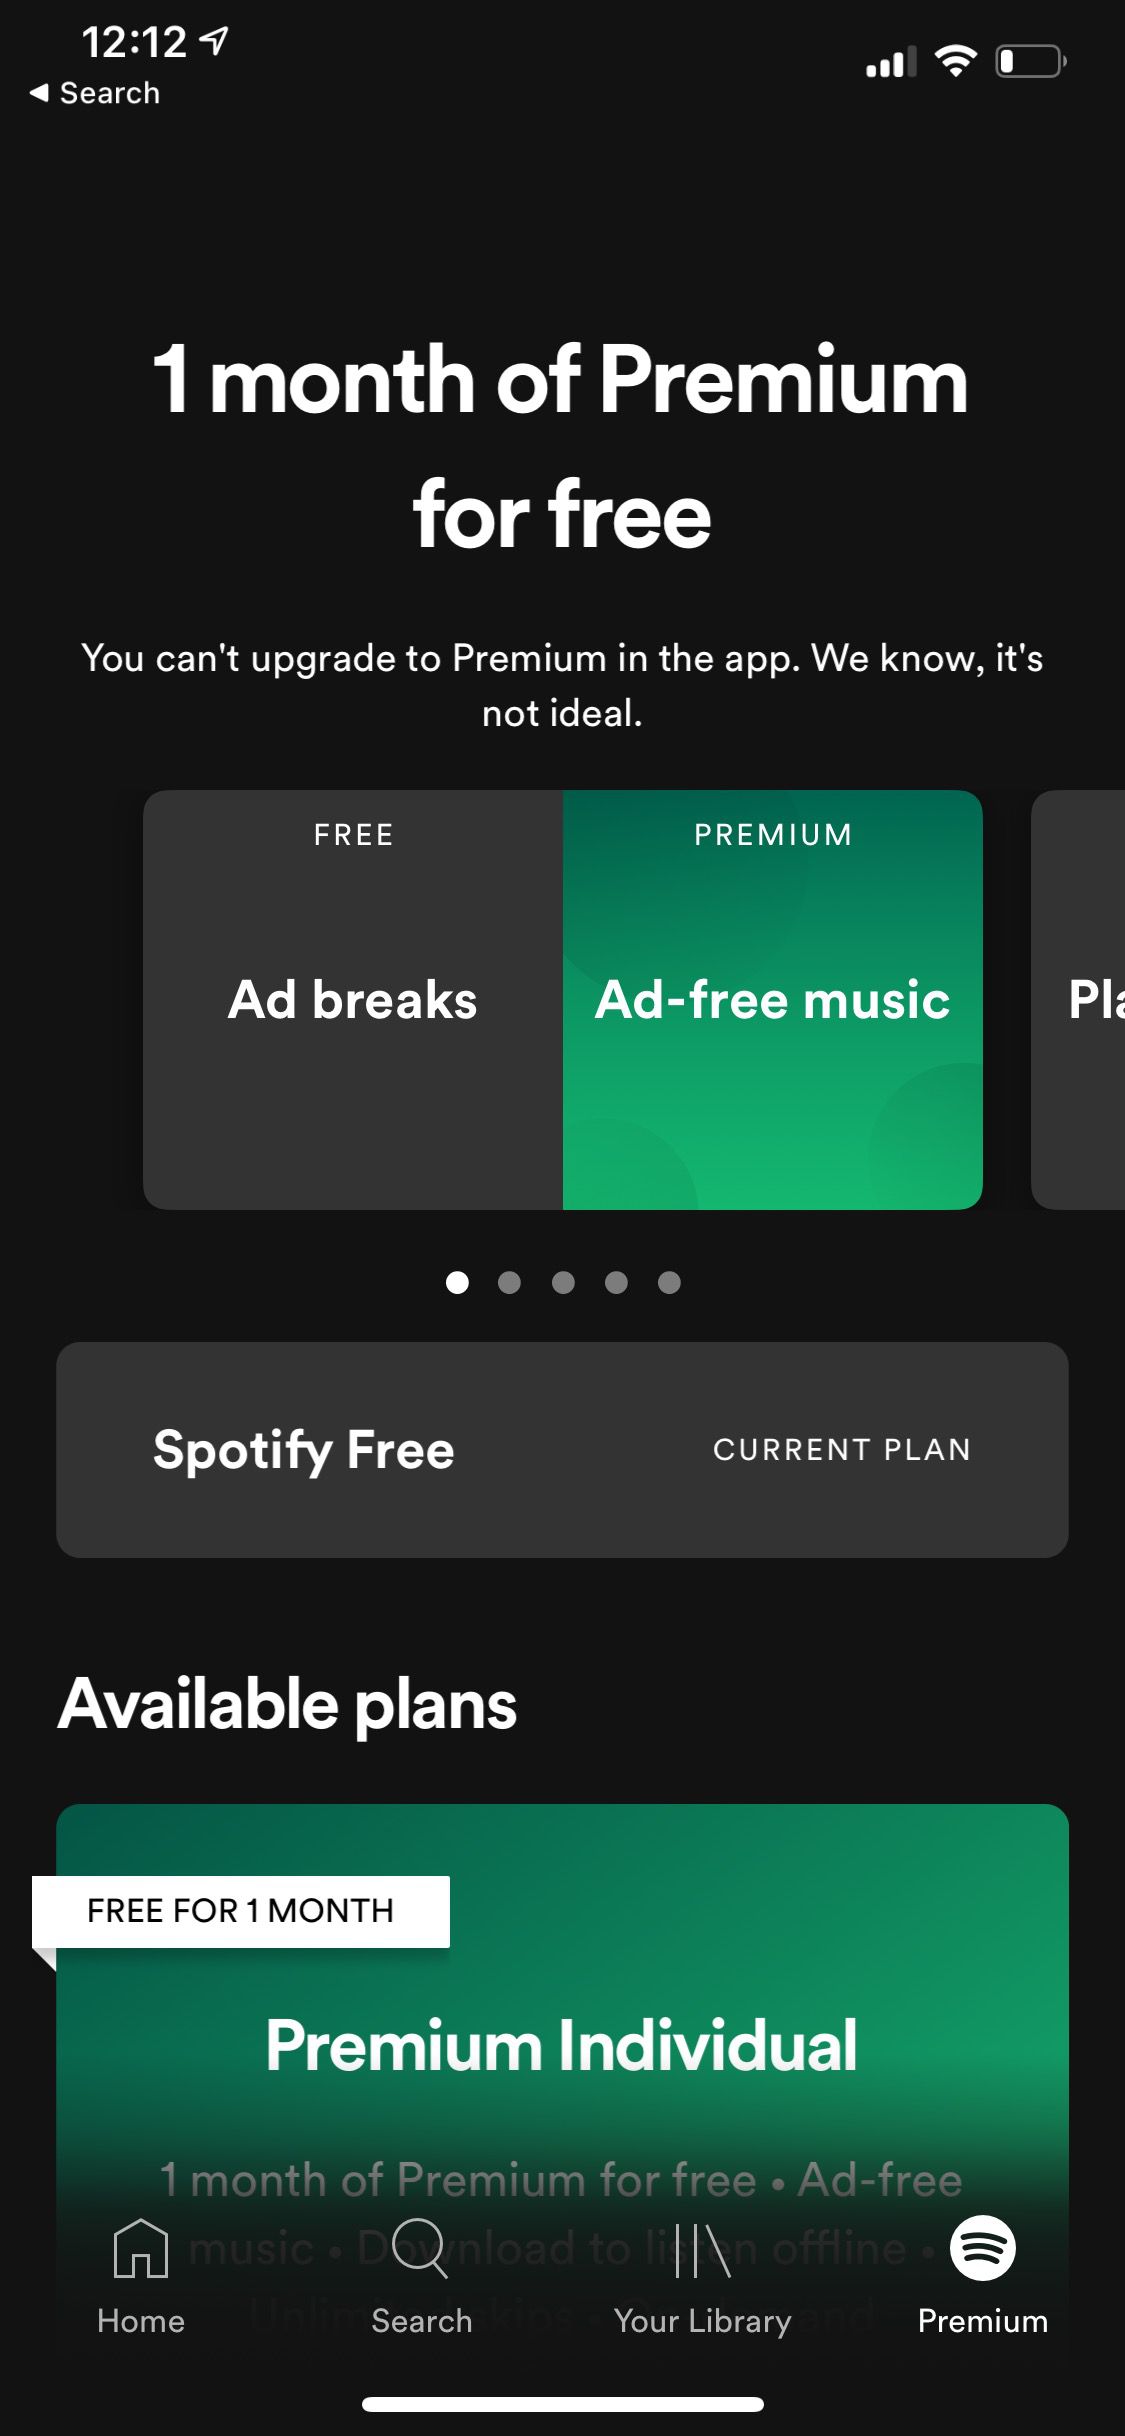 A screenshot of the Spotify app telling users “You can’t upgrade to Premium in the app.”